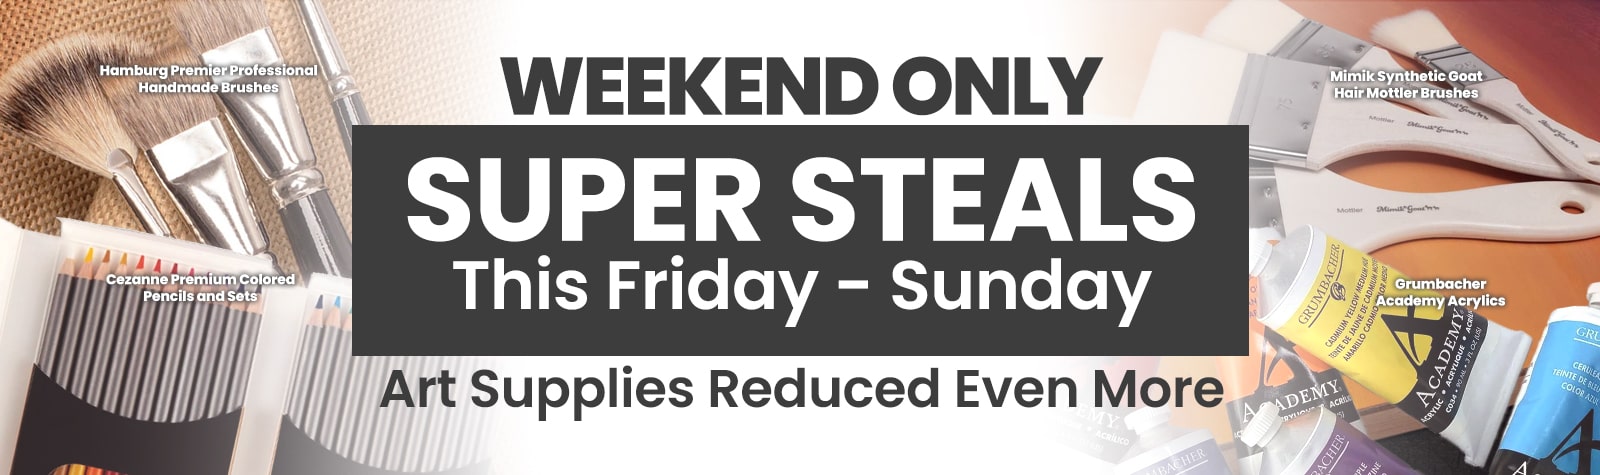  3 Days Only Super Steals - Supplies Reduced Even More!